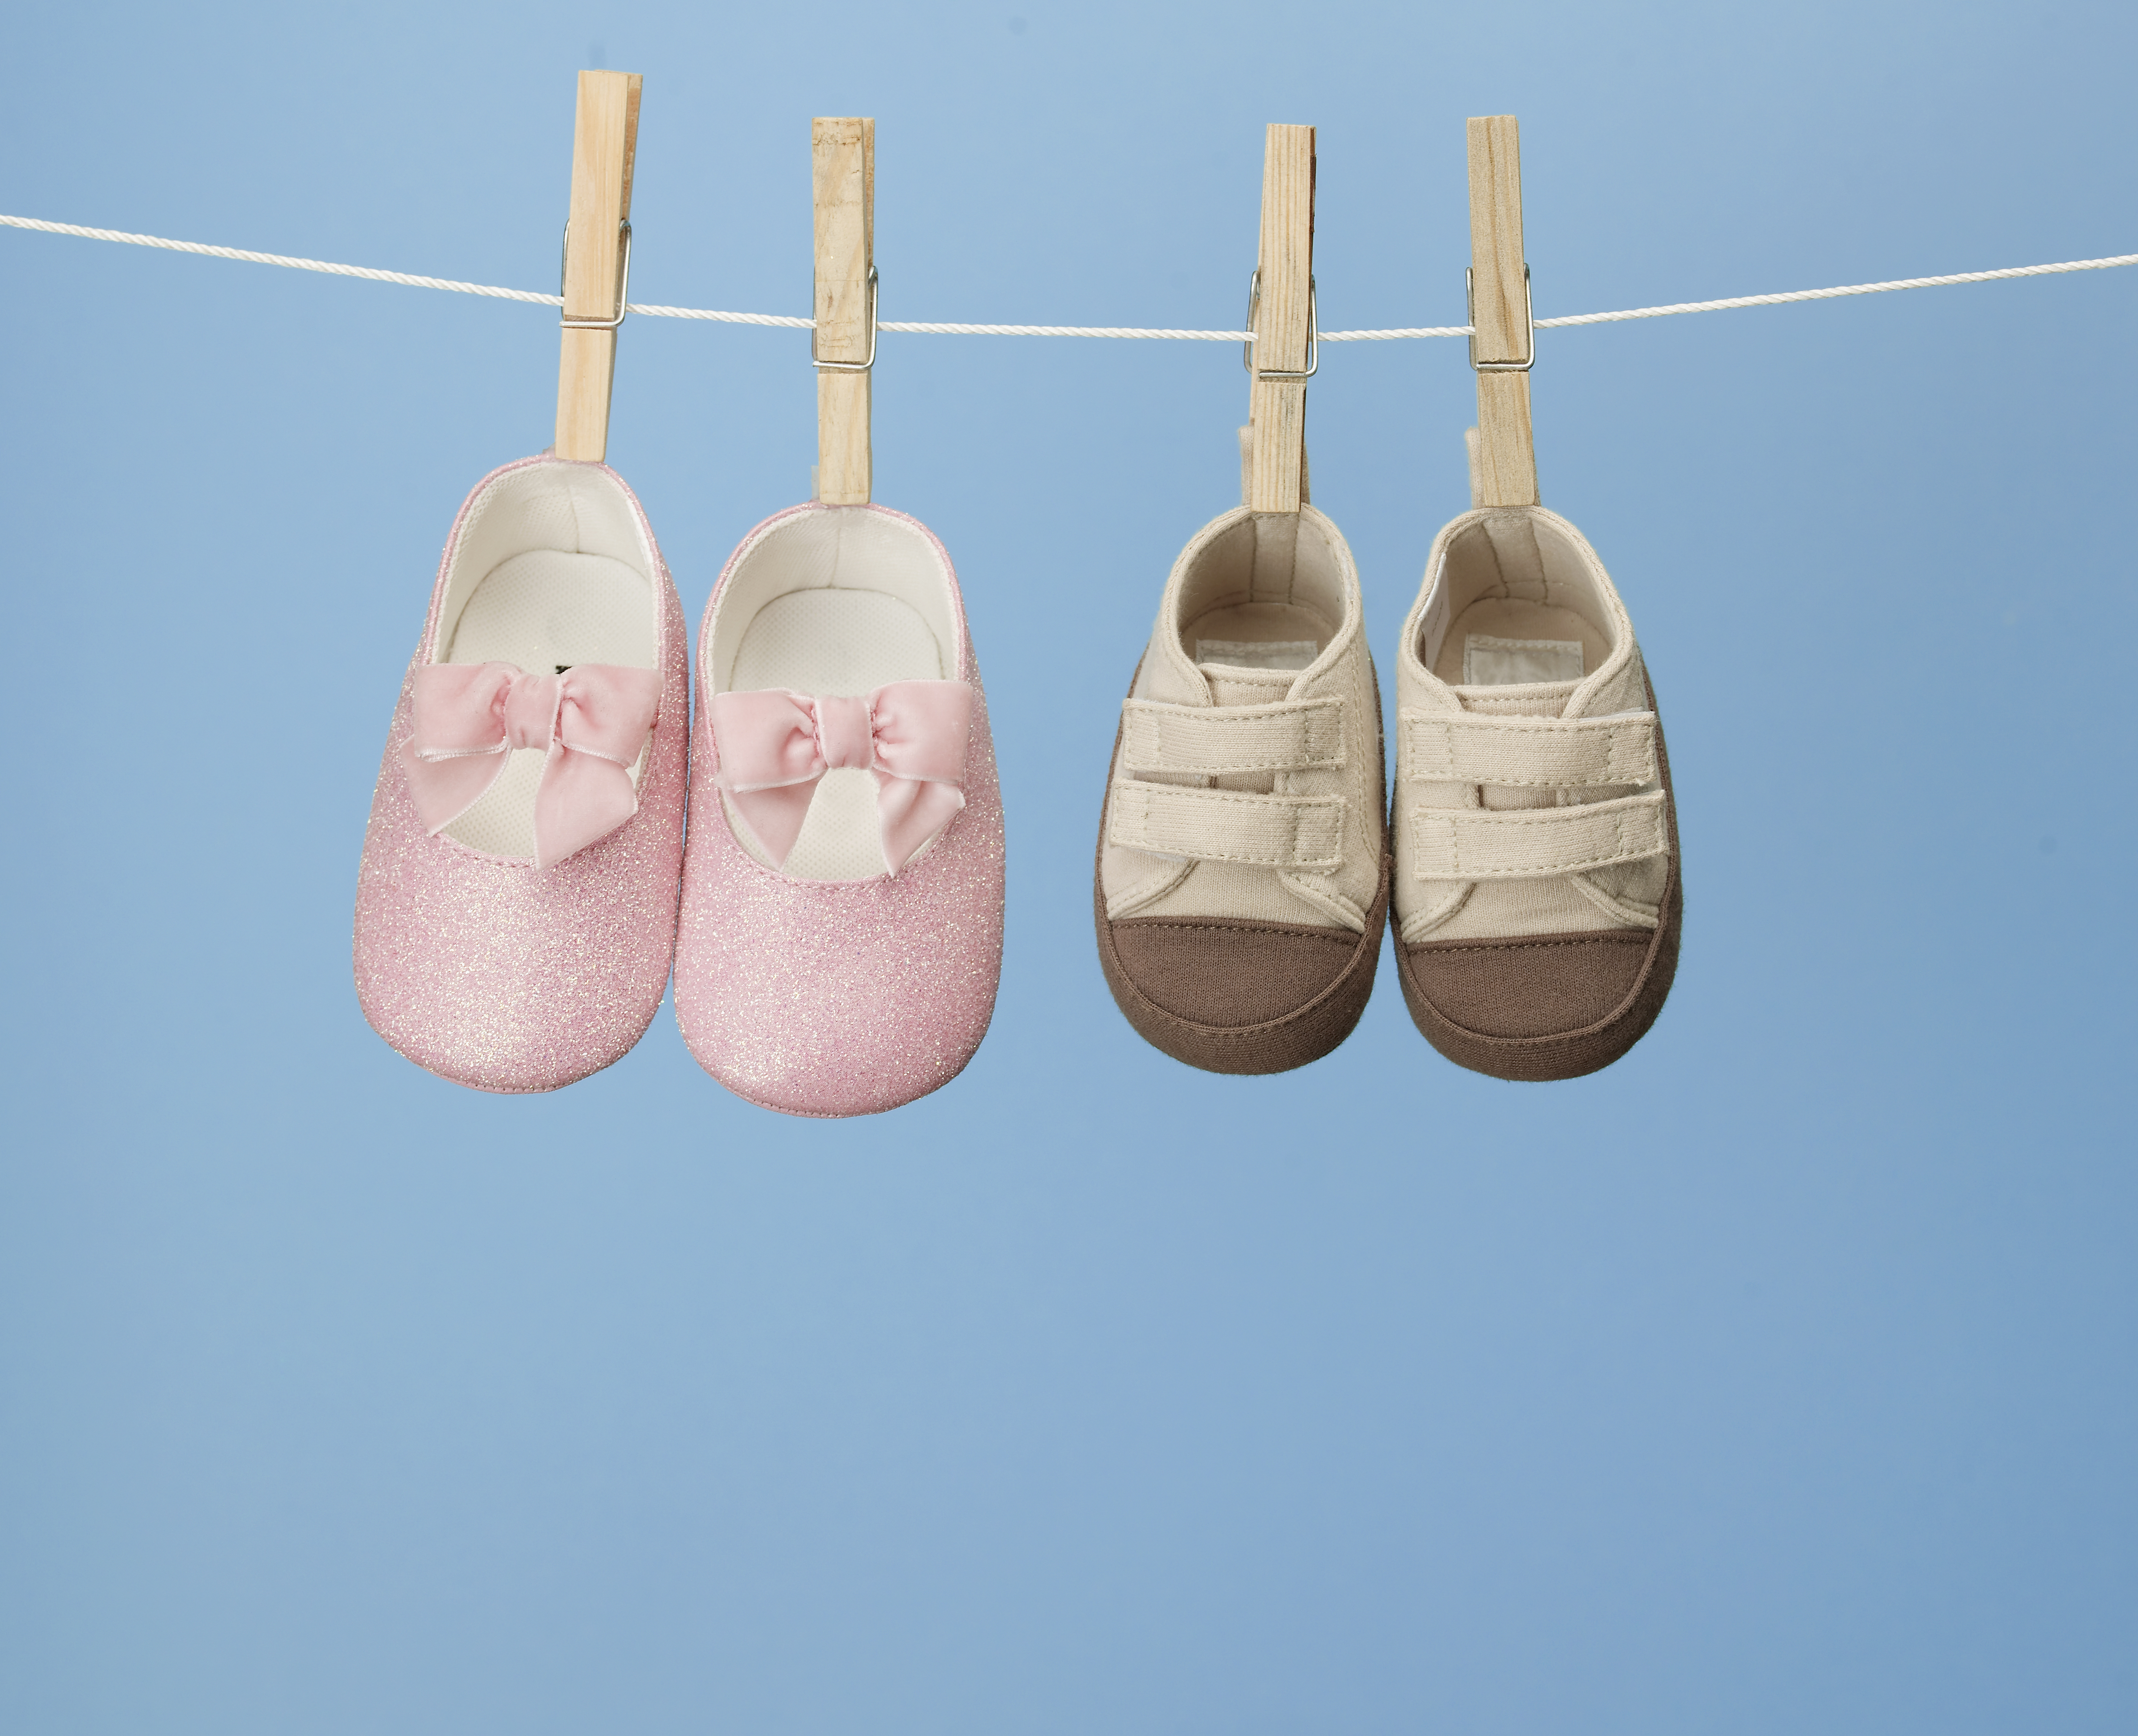 Two Pairs of Shoes on Clothes Line